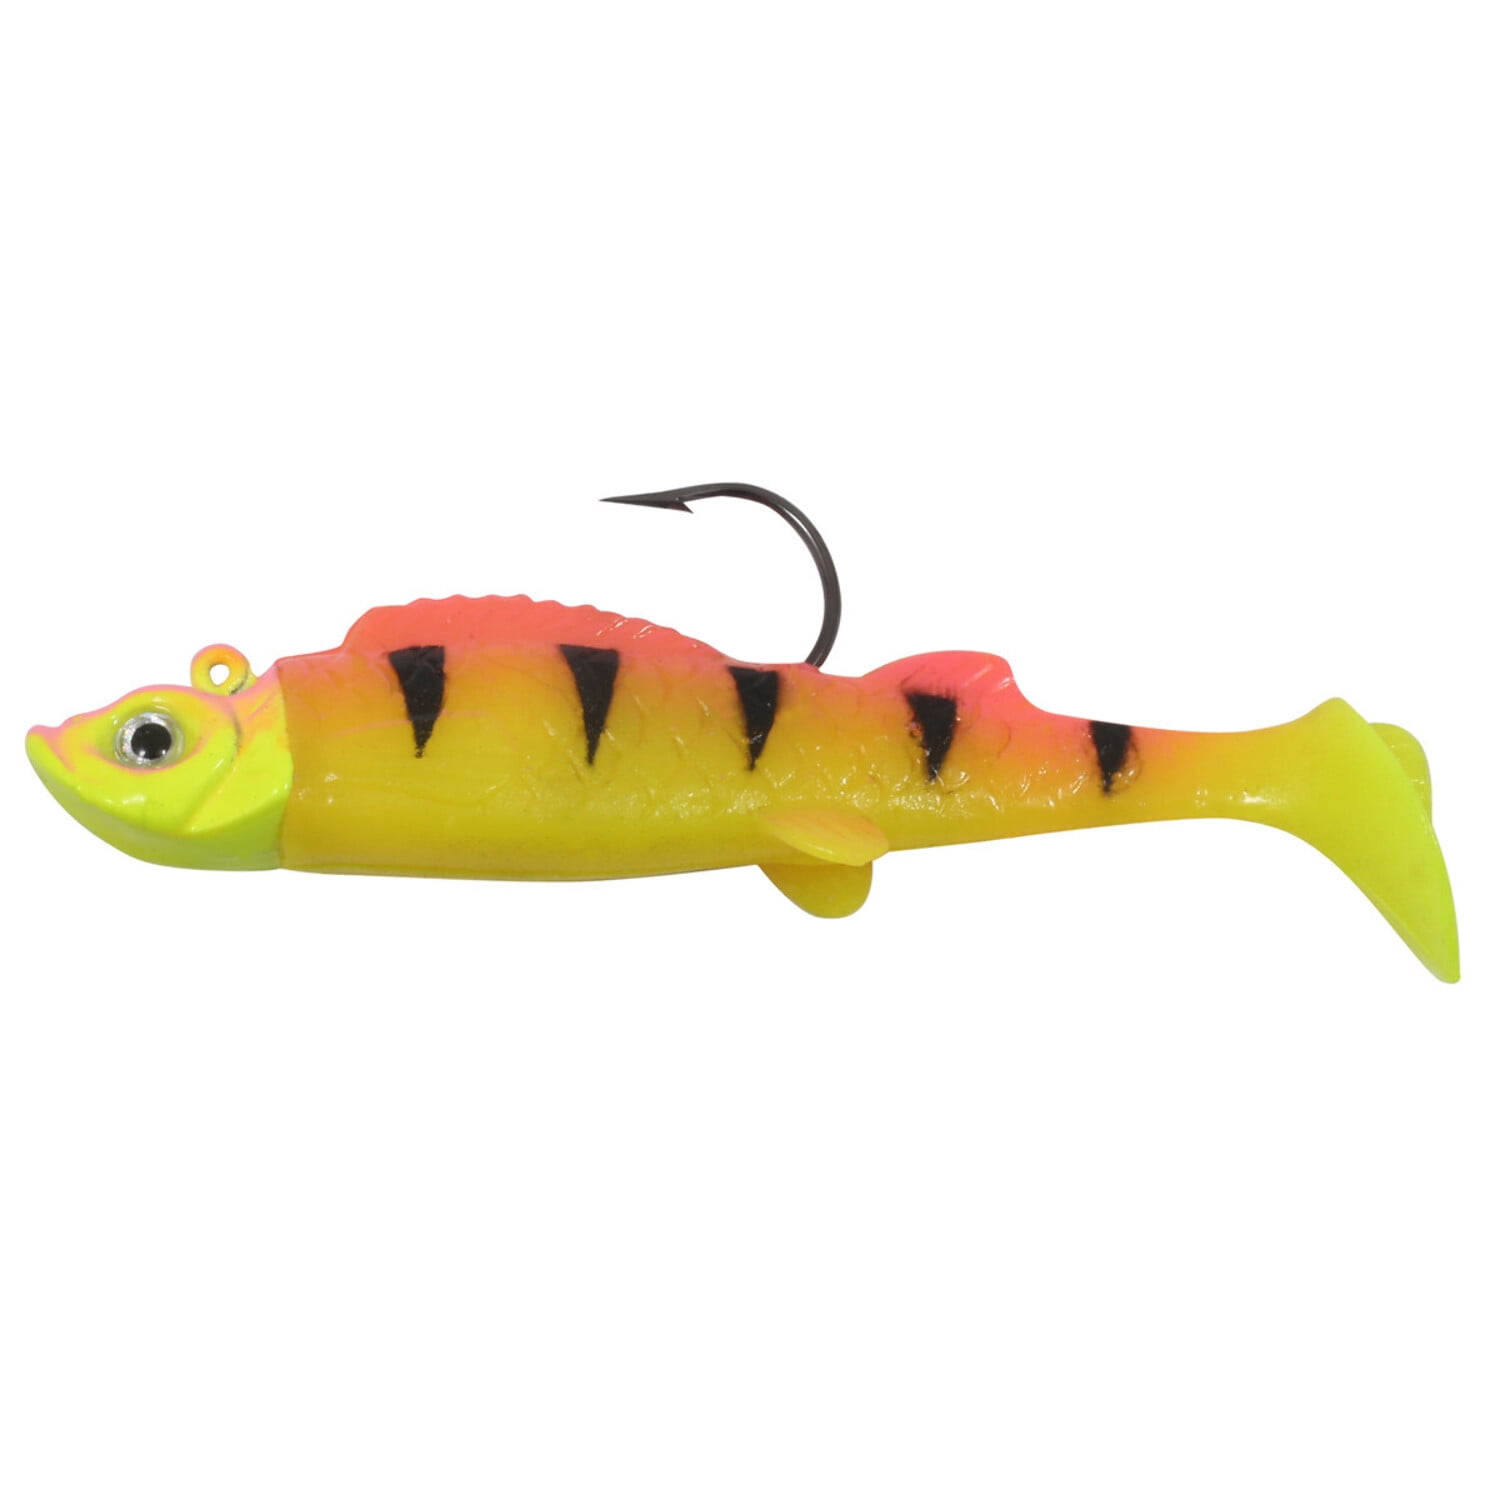 Northland Tackle Mimic Minnow Shad, Jig and Tail, Freshwater